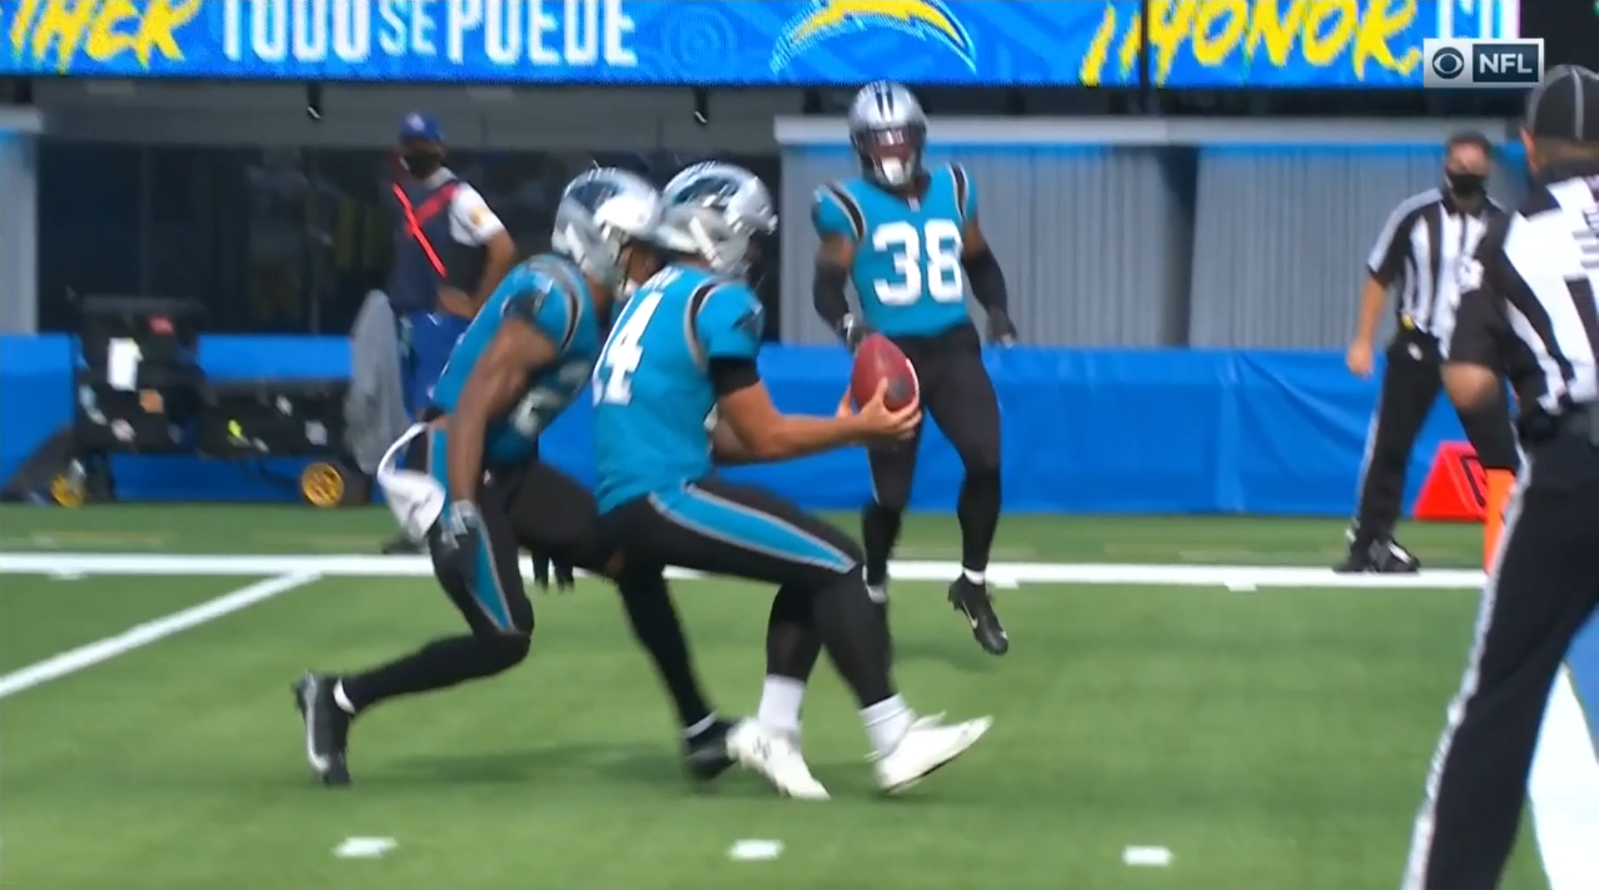 J. J. Jansen downs a punt for the Carolina Panthers near the end zone